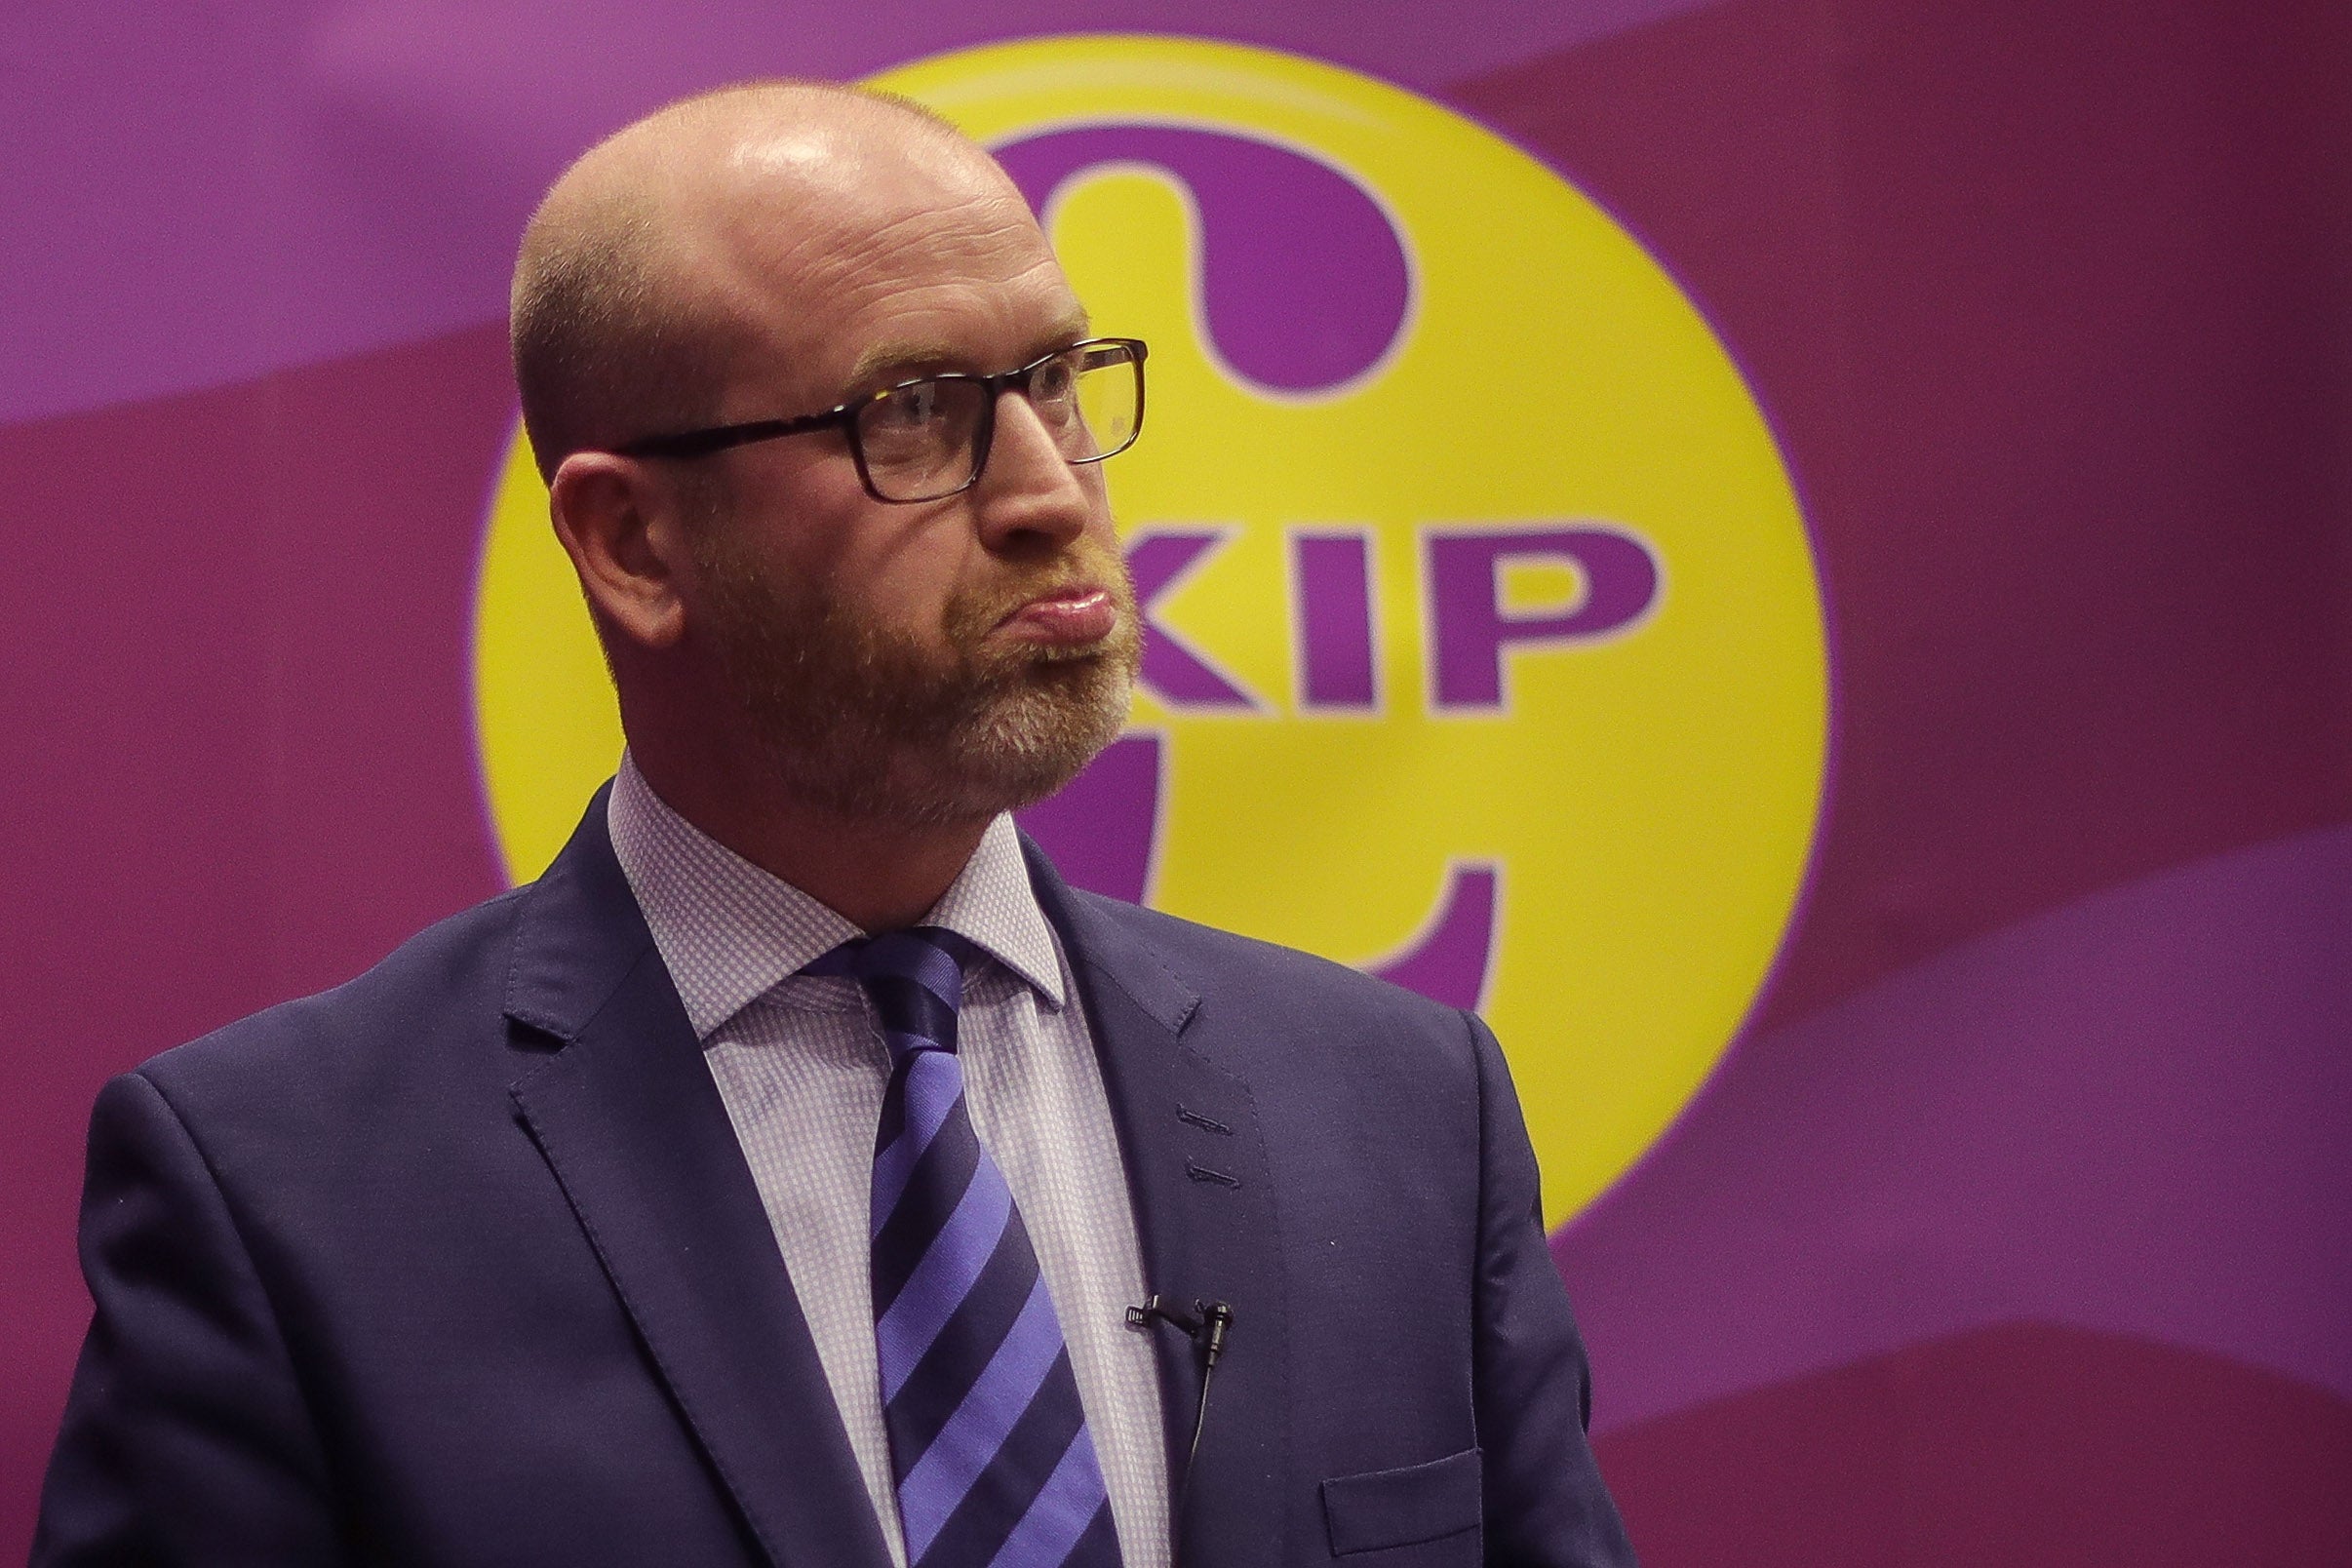 Paul Nuttall has been forced to apologise after making false claims on his website